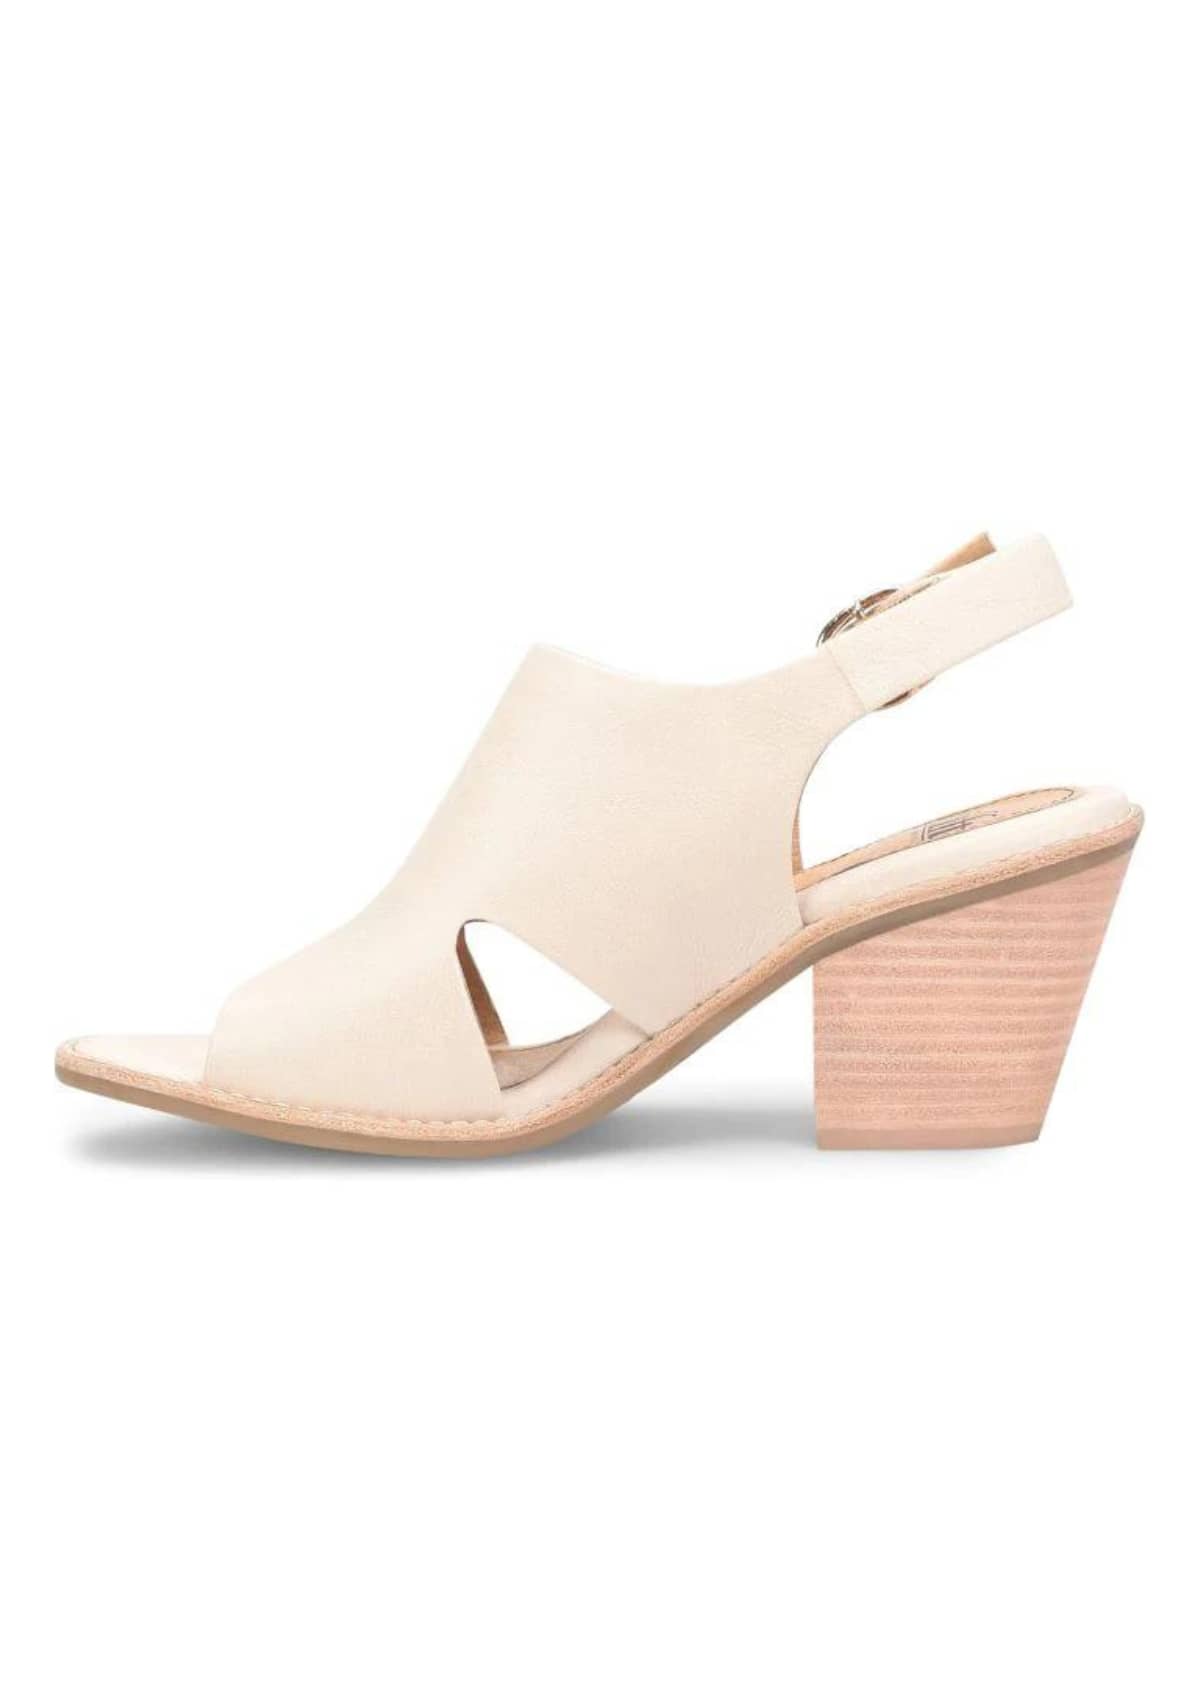 Mendi Crossover Slingback with Stacked Heel - Tapioca Grey -Sofft Shoe Co- Ruby Jane-